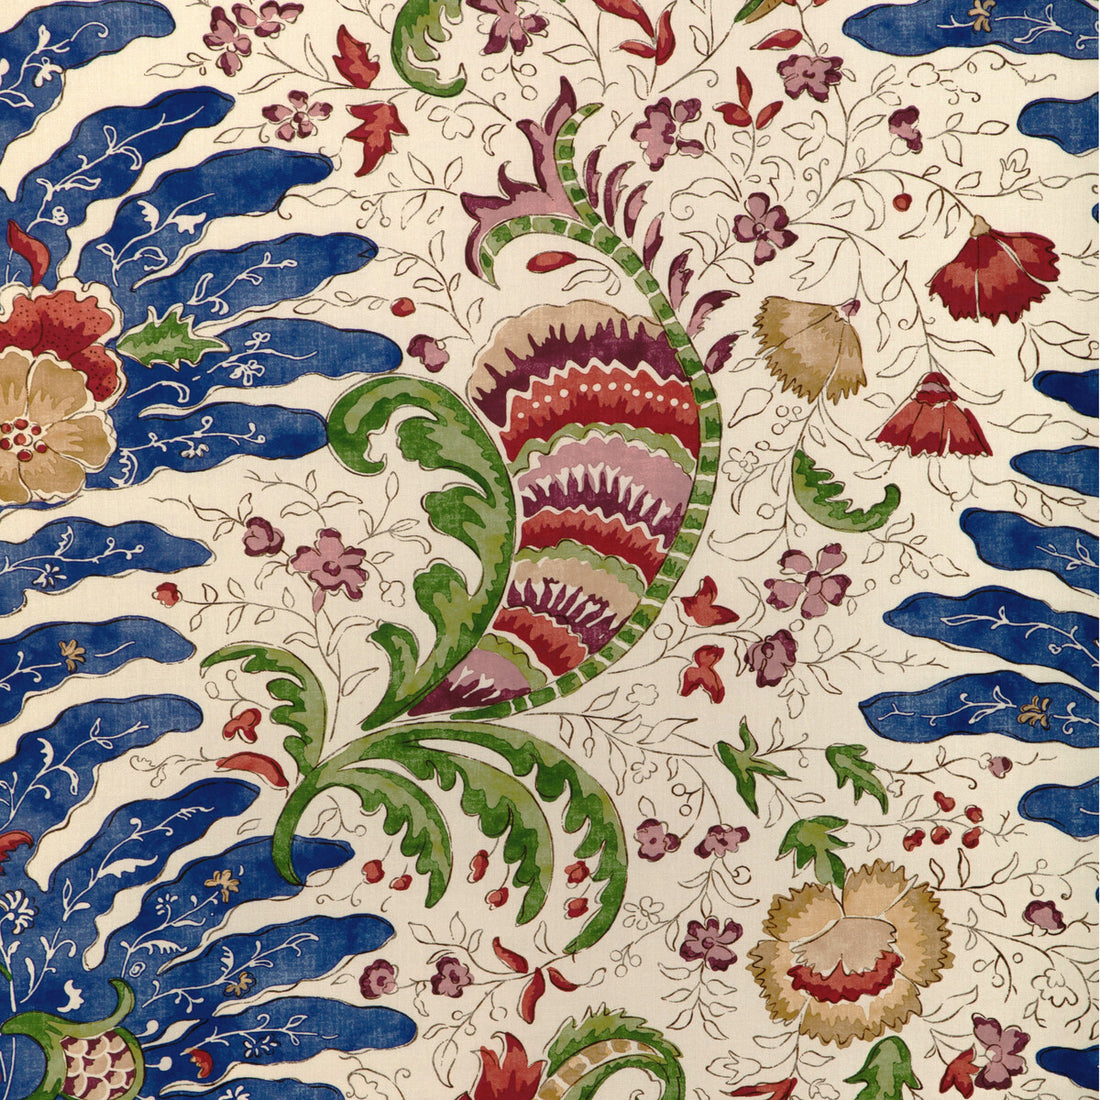 Riviere Print fabric in blue color - pattern 8024105.519.0 - by Brunschwig &amp; Fils in the La Menagerie collection